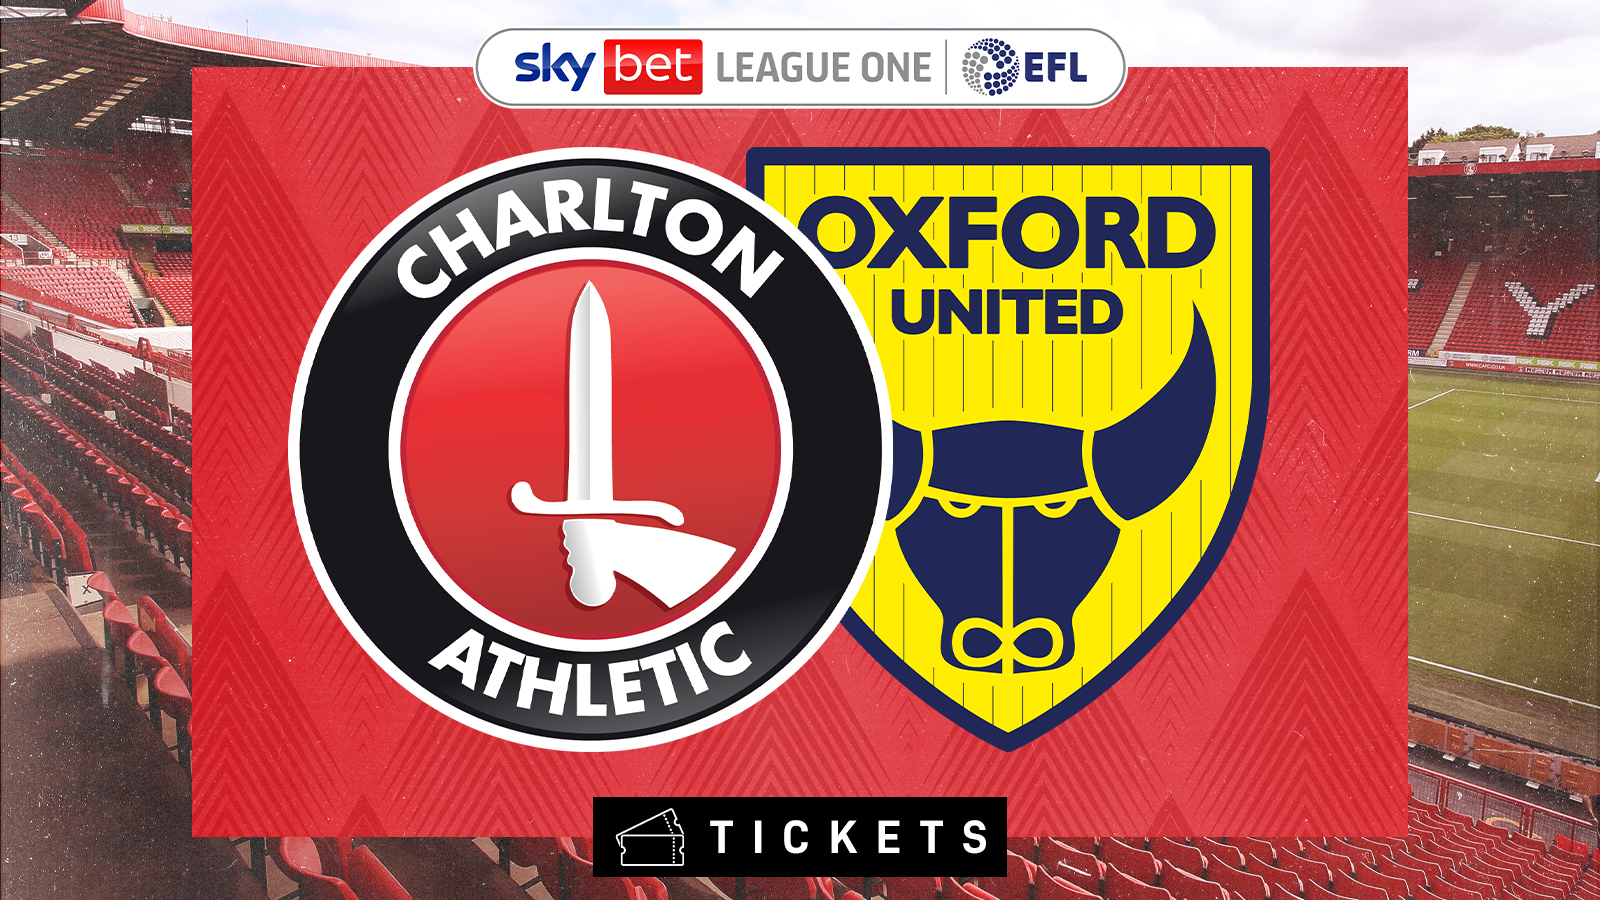 Get your tickets for Saturday's game against Oxford United in SE7